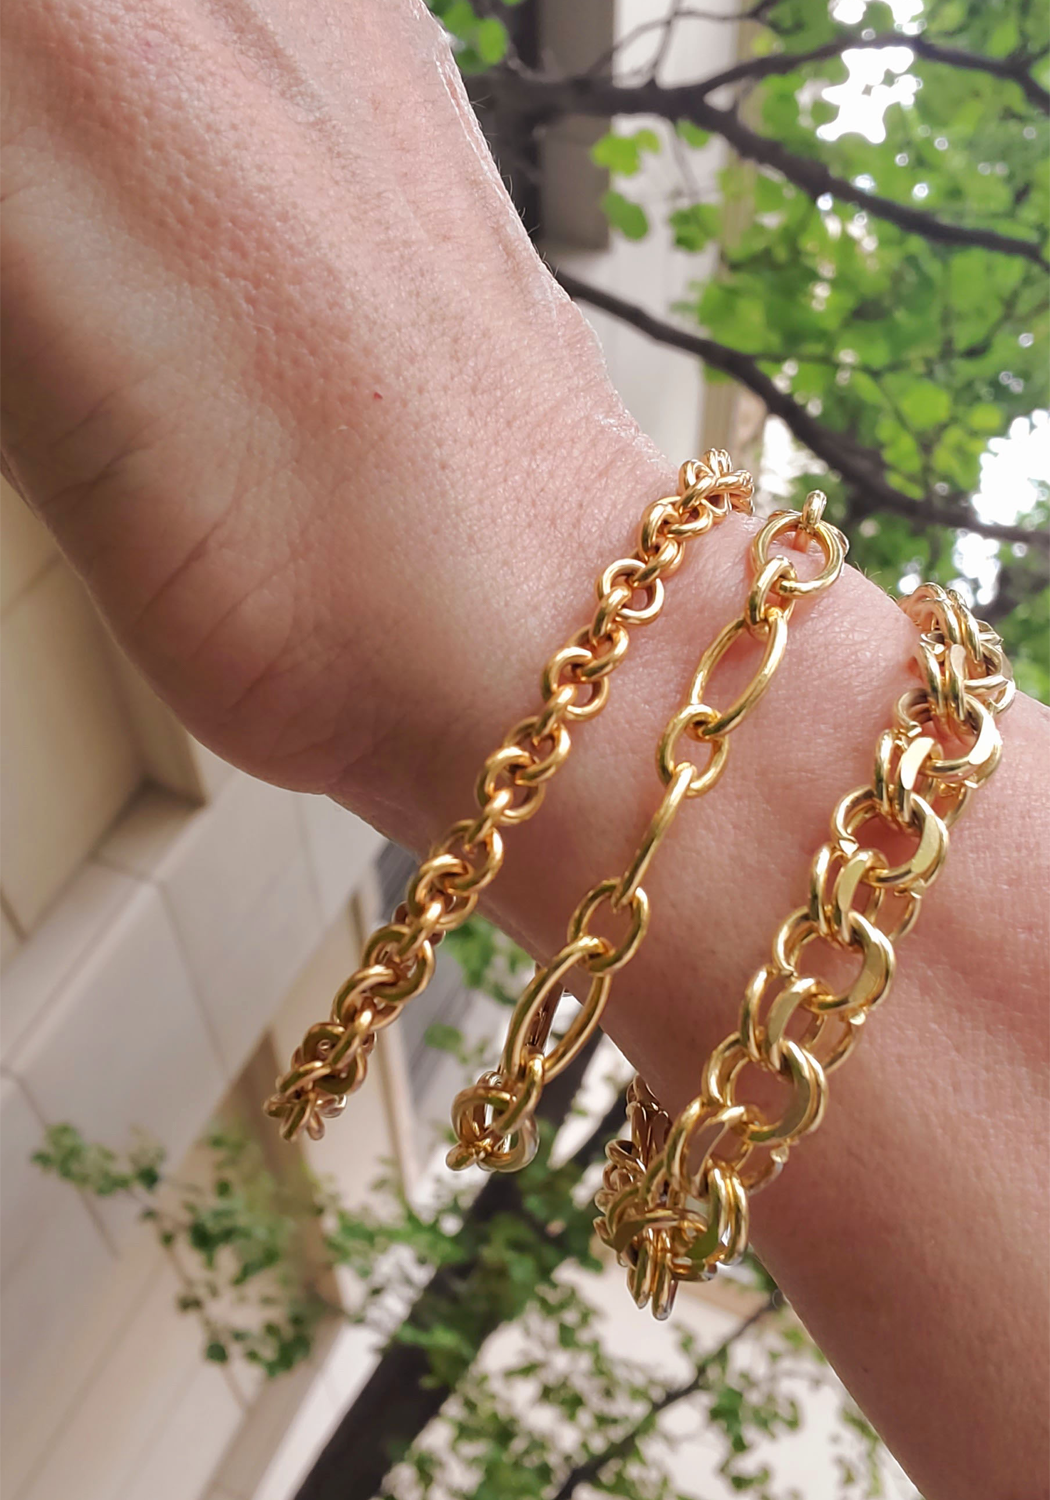 Oster Jewelers 14K Yellow Gold Bracelets for Layering & Charms (sold separately)